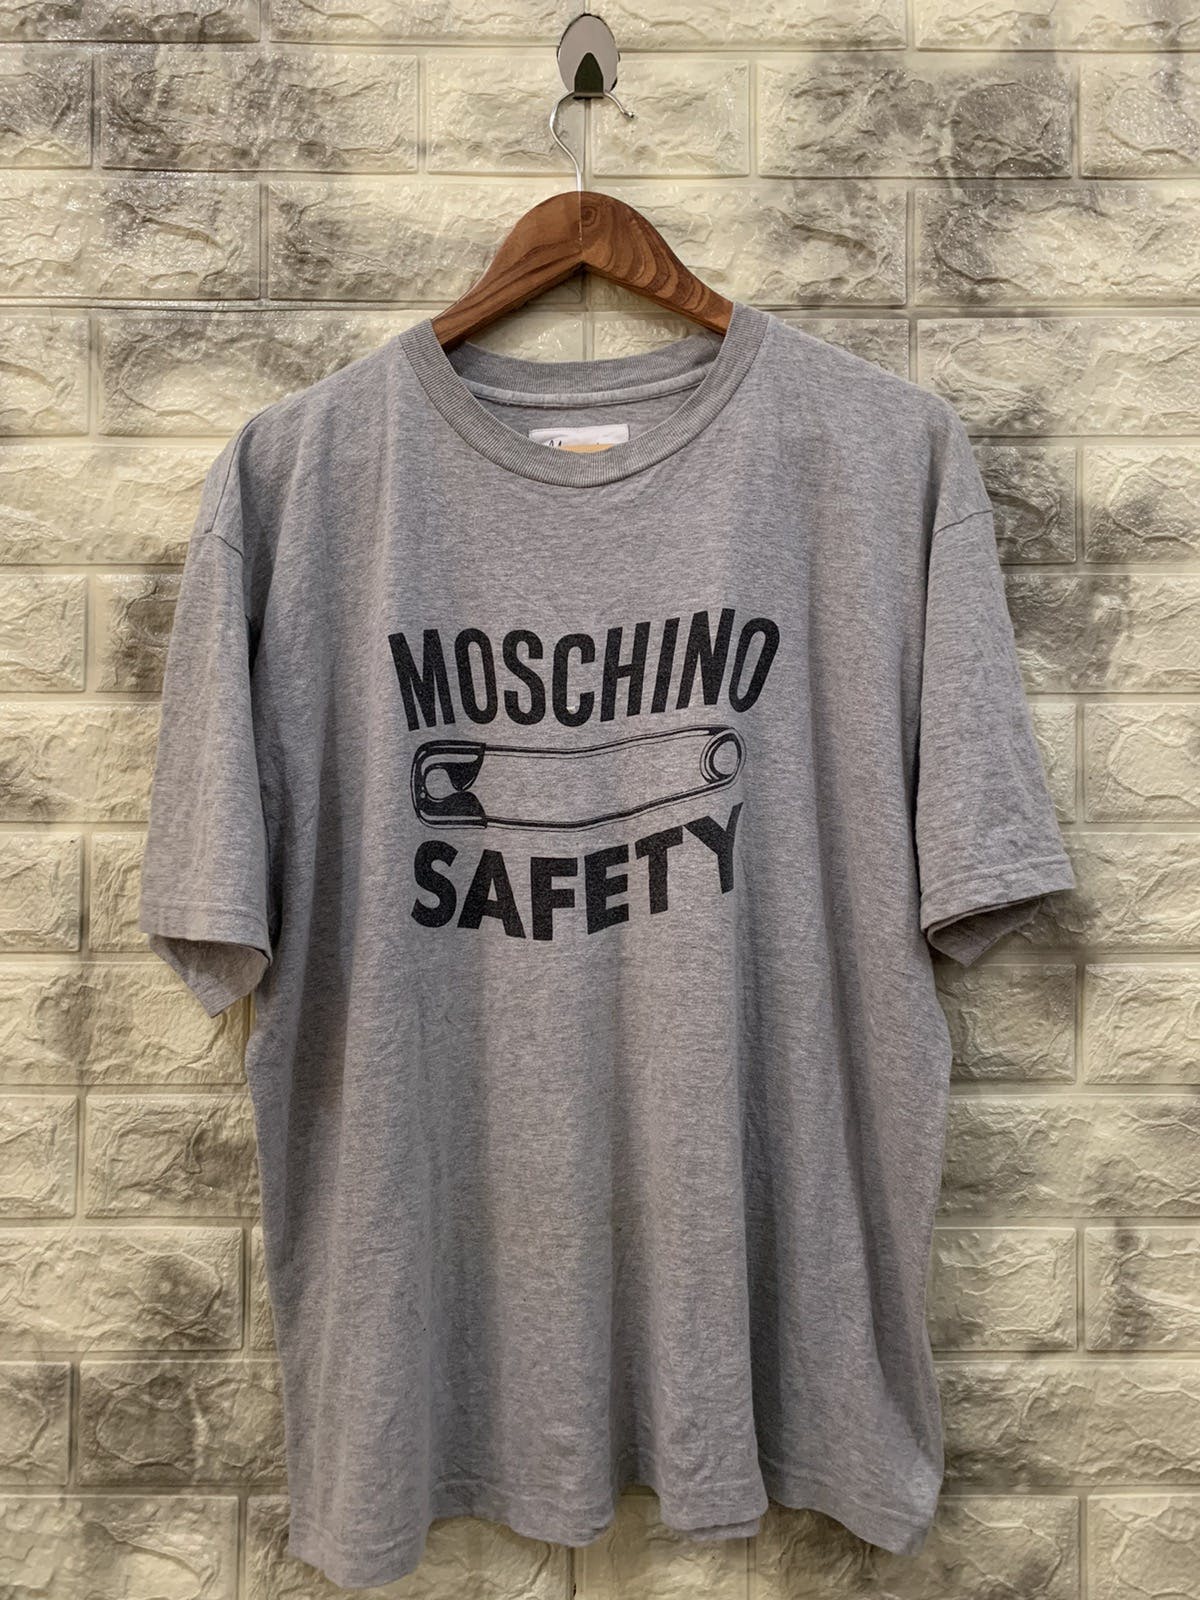 Moschino Safety graphic tee - 1